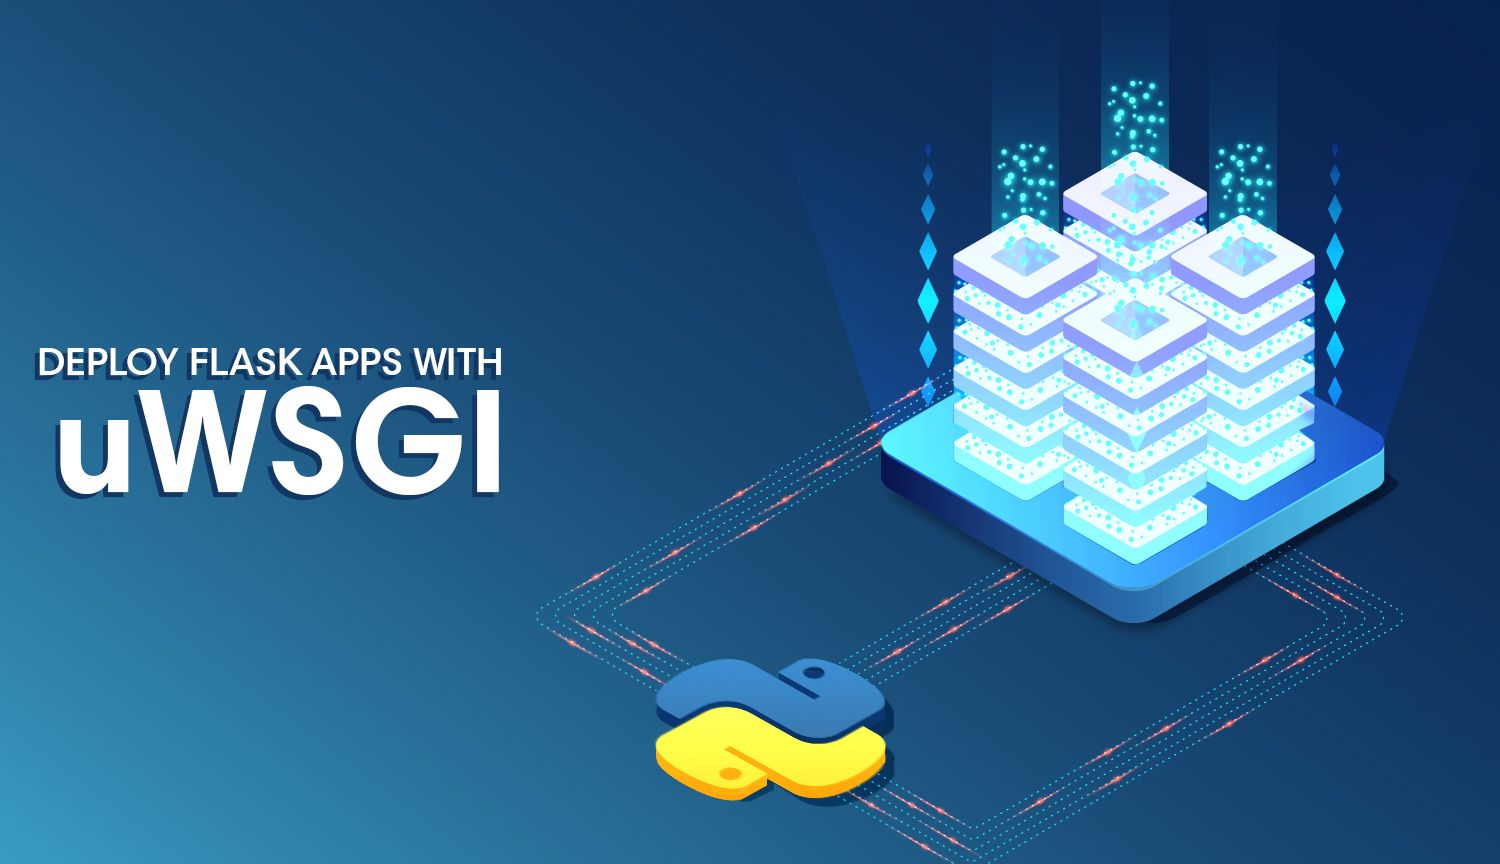 Deploy Flask Applications with uWSGI and Nginx